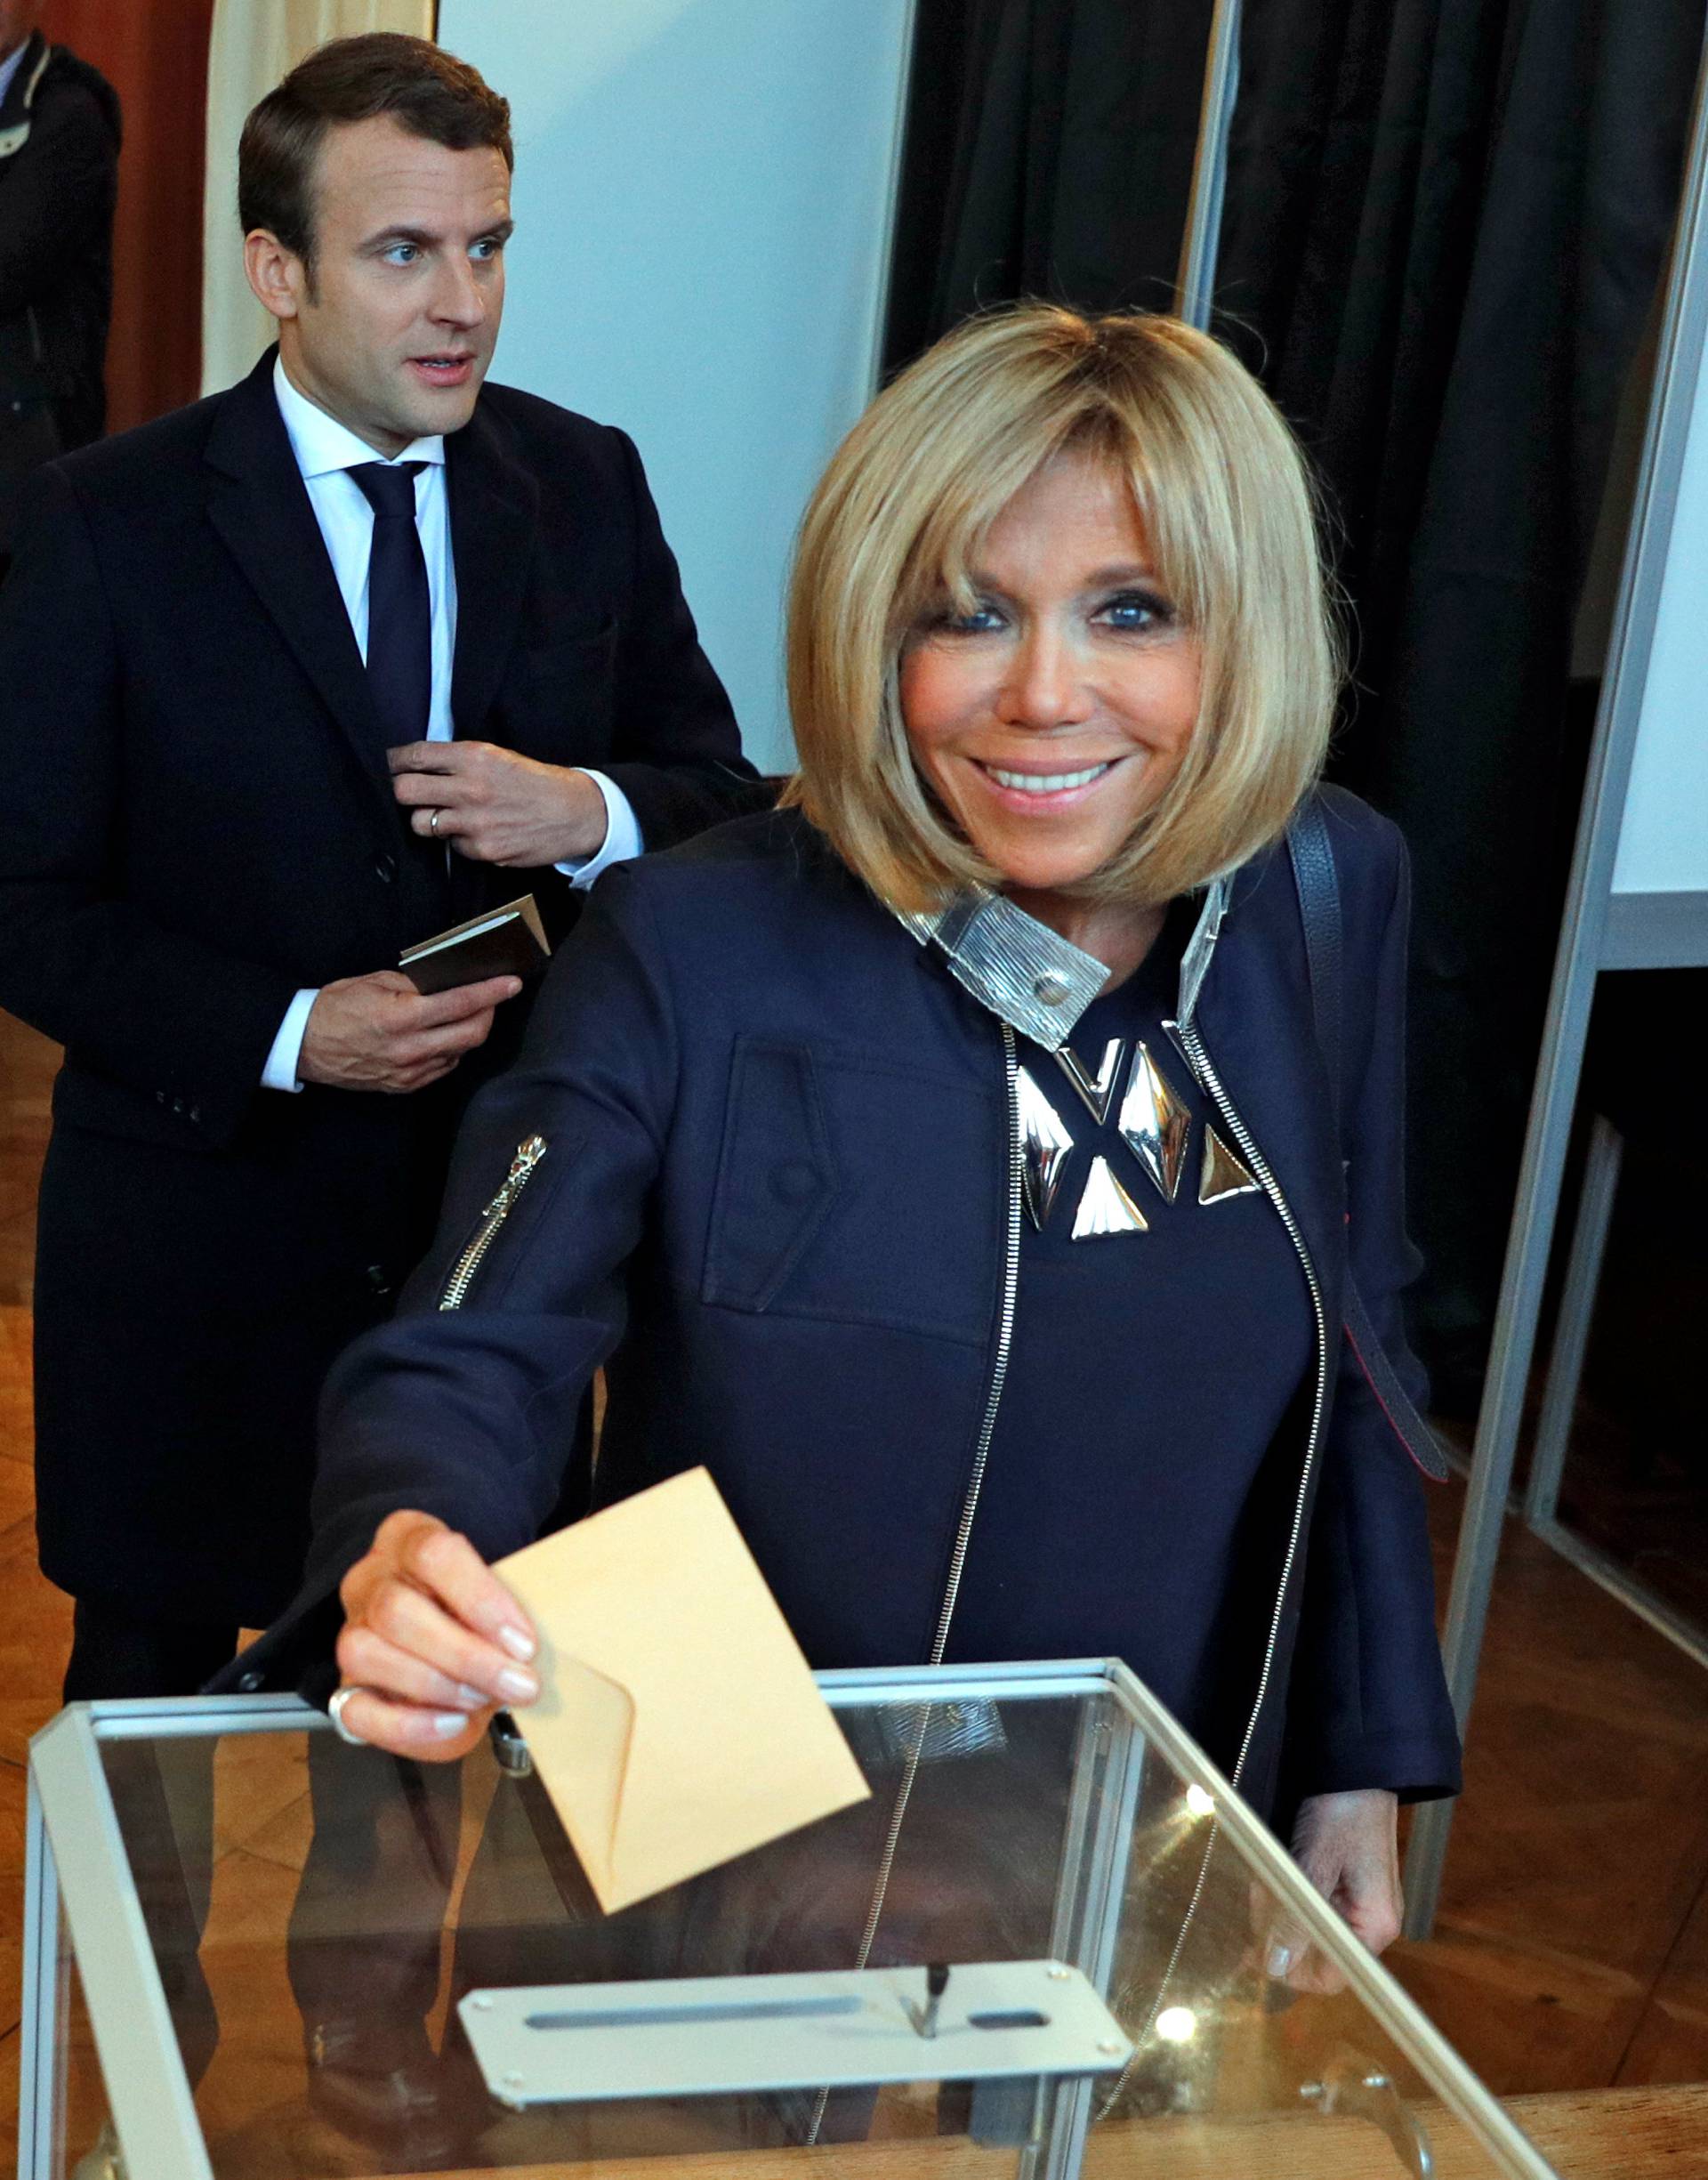 Brigitte Trogneux, the wife of French presidential election candidate Emmanuel Macron casts her ballot during the the second round of 2017 French presidential election, in Le Touquet